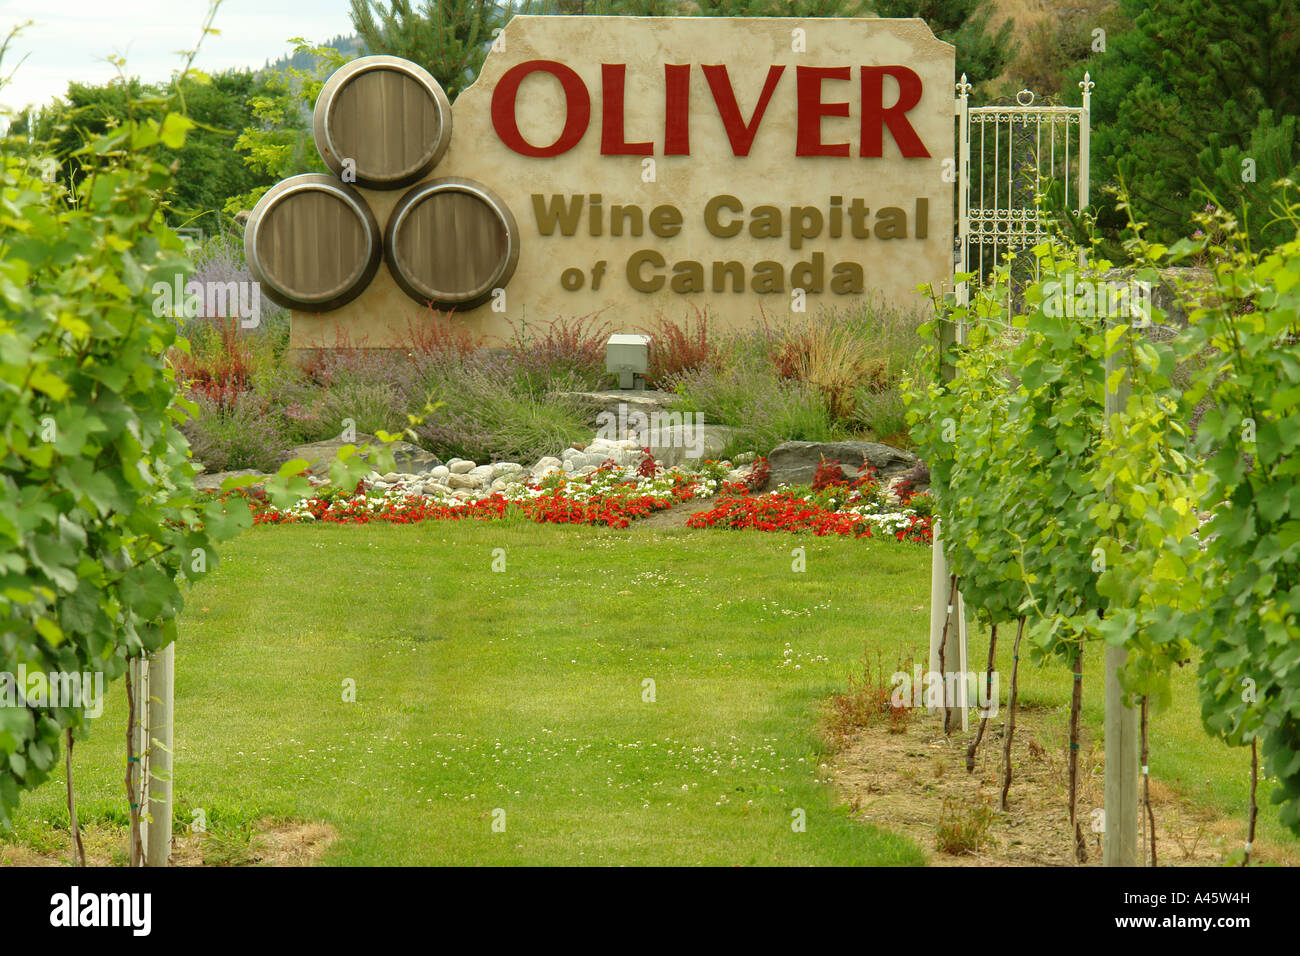 AJD55803, Oliver, Okanagan Valley, British Columbia, Canada, Oliver Wine Capital of Canada, entrance sign Stock Photo